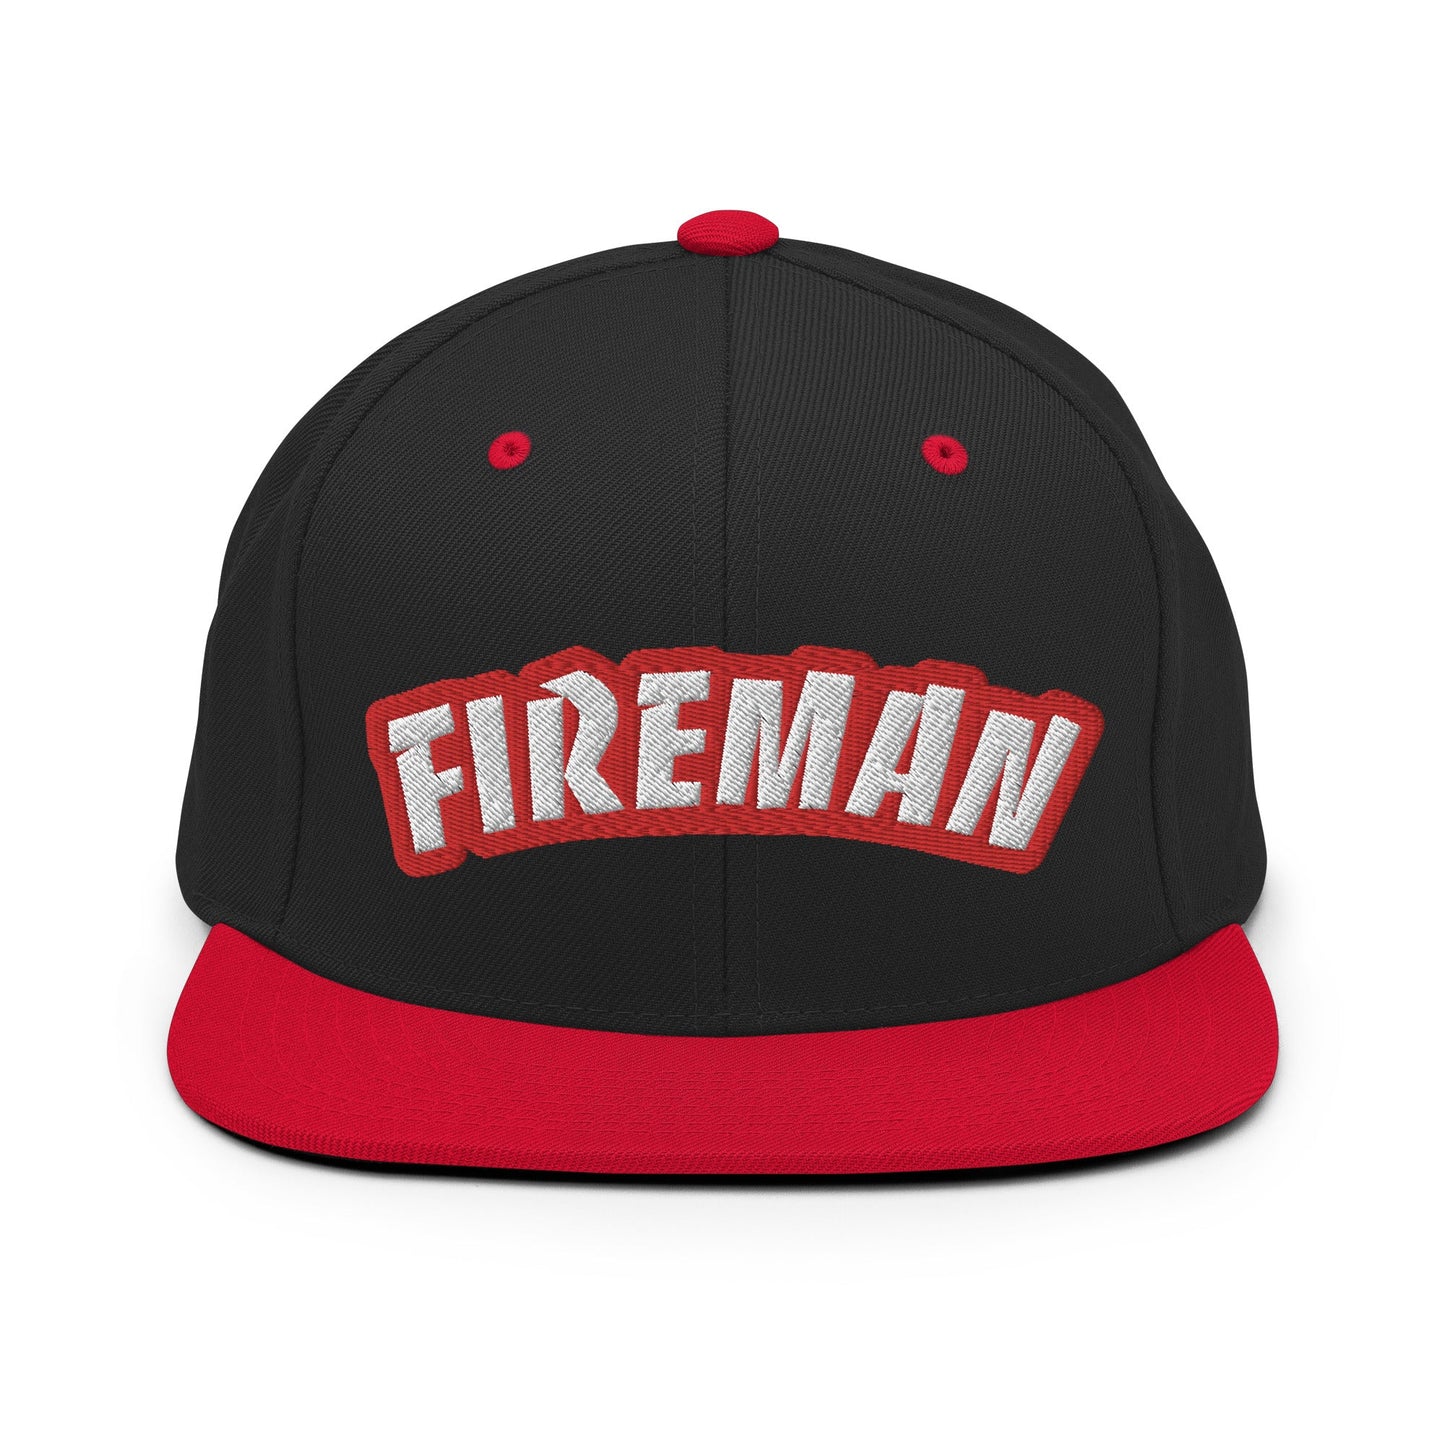 Black and red snapback with Fireman text on white background